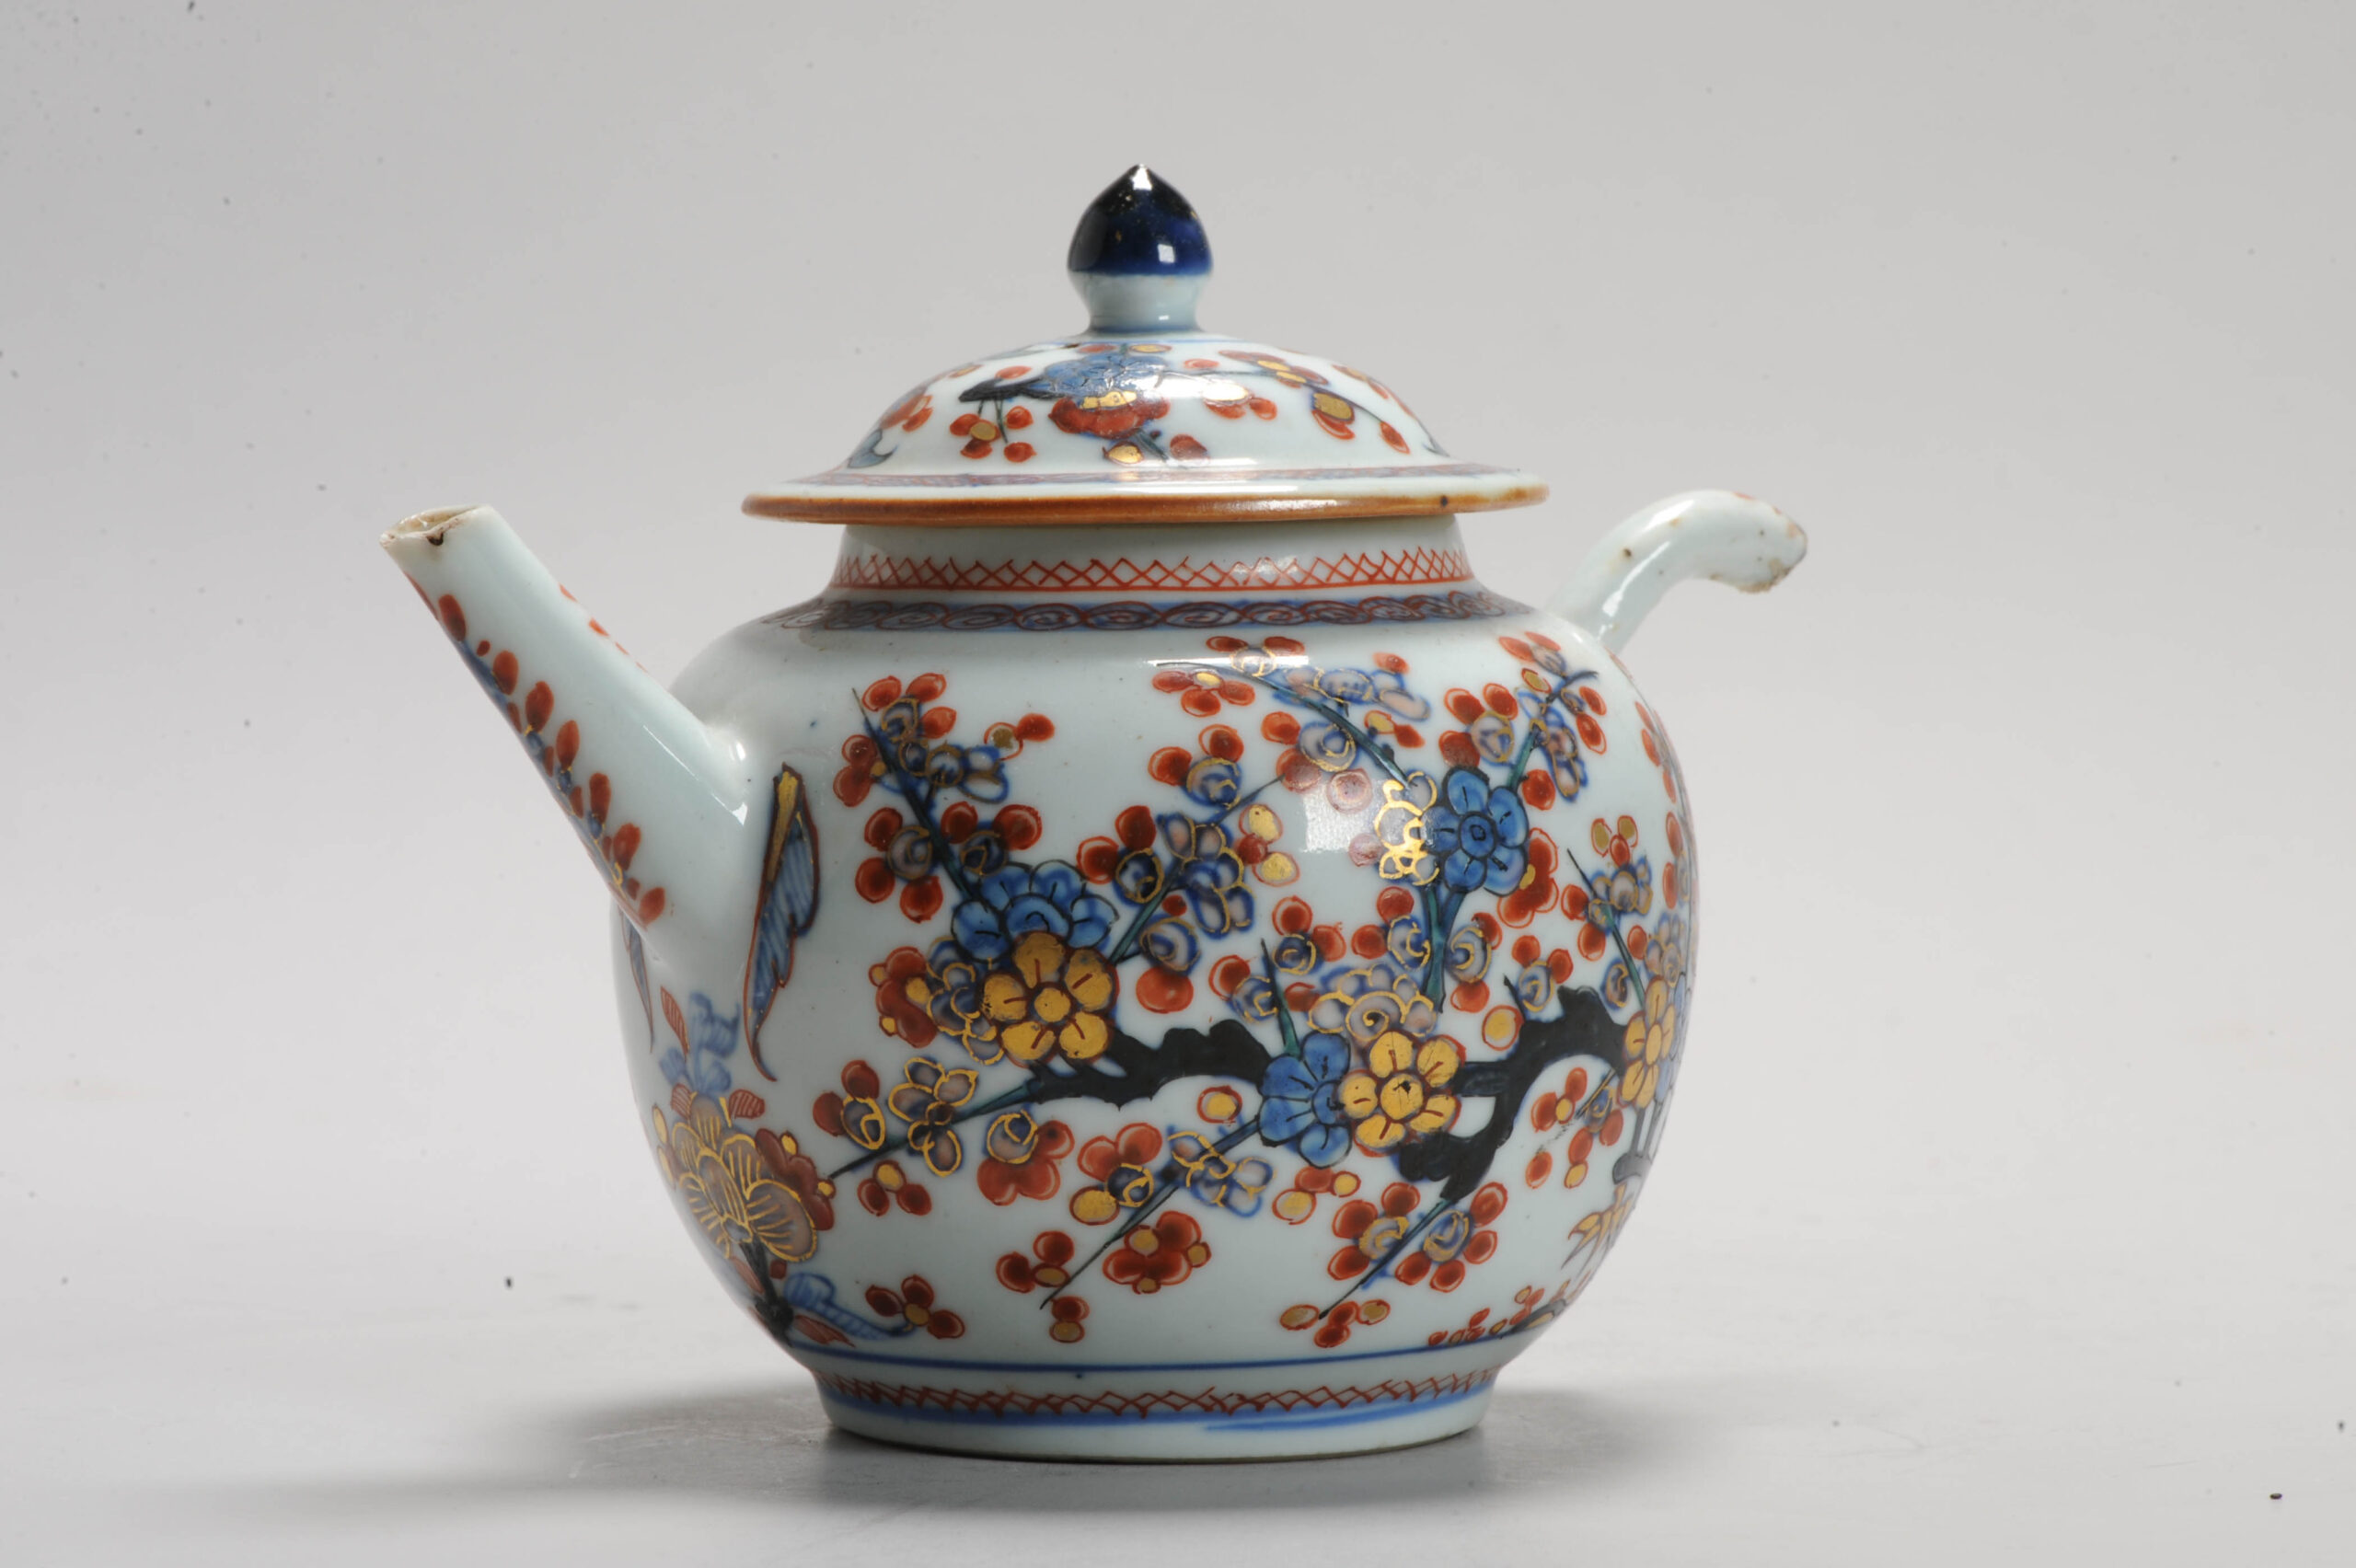 1149 Very nice Chinese Teapot, Painted in Holland. Amsterdam Bont